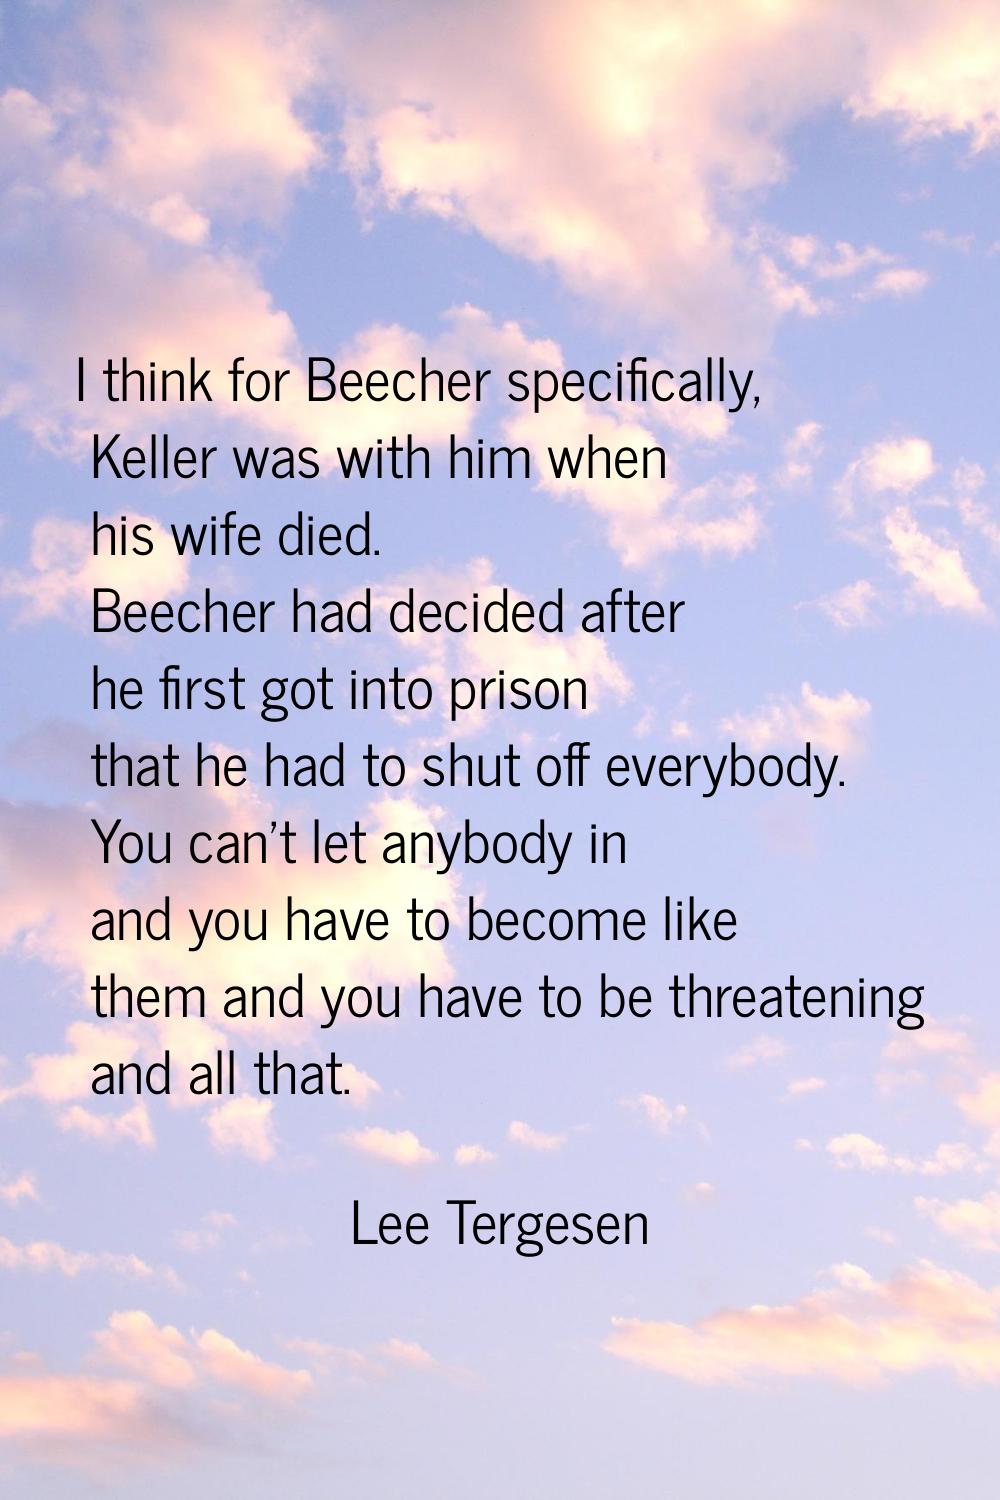 I think for Beecher specifically, Keller was with him when his wife died. Beecher had decided after